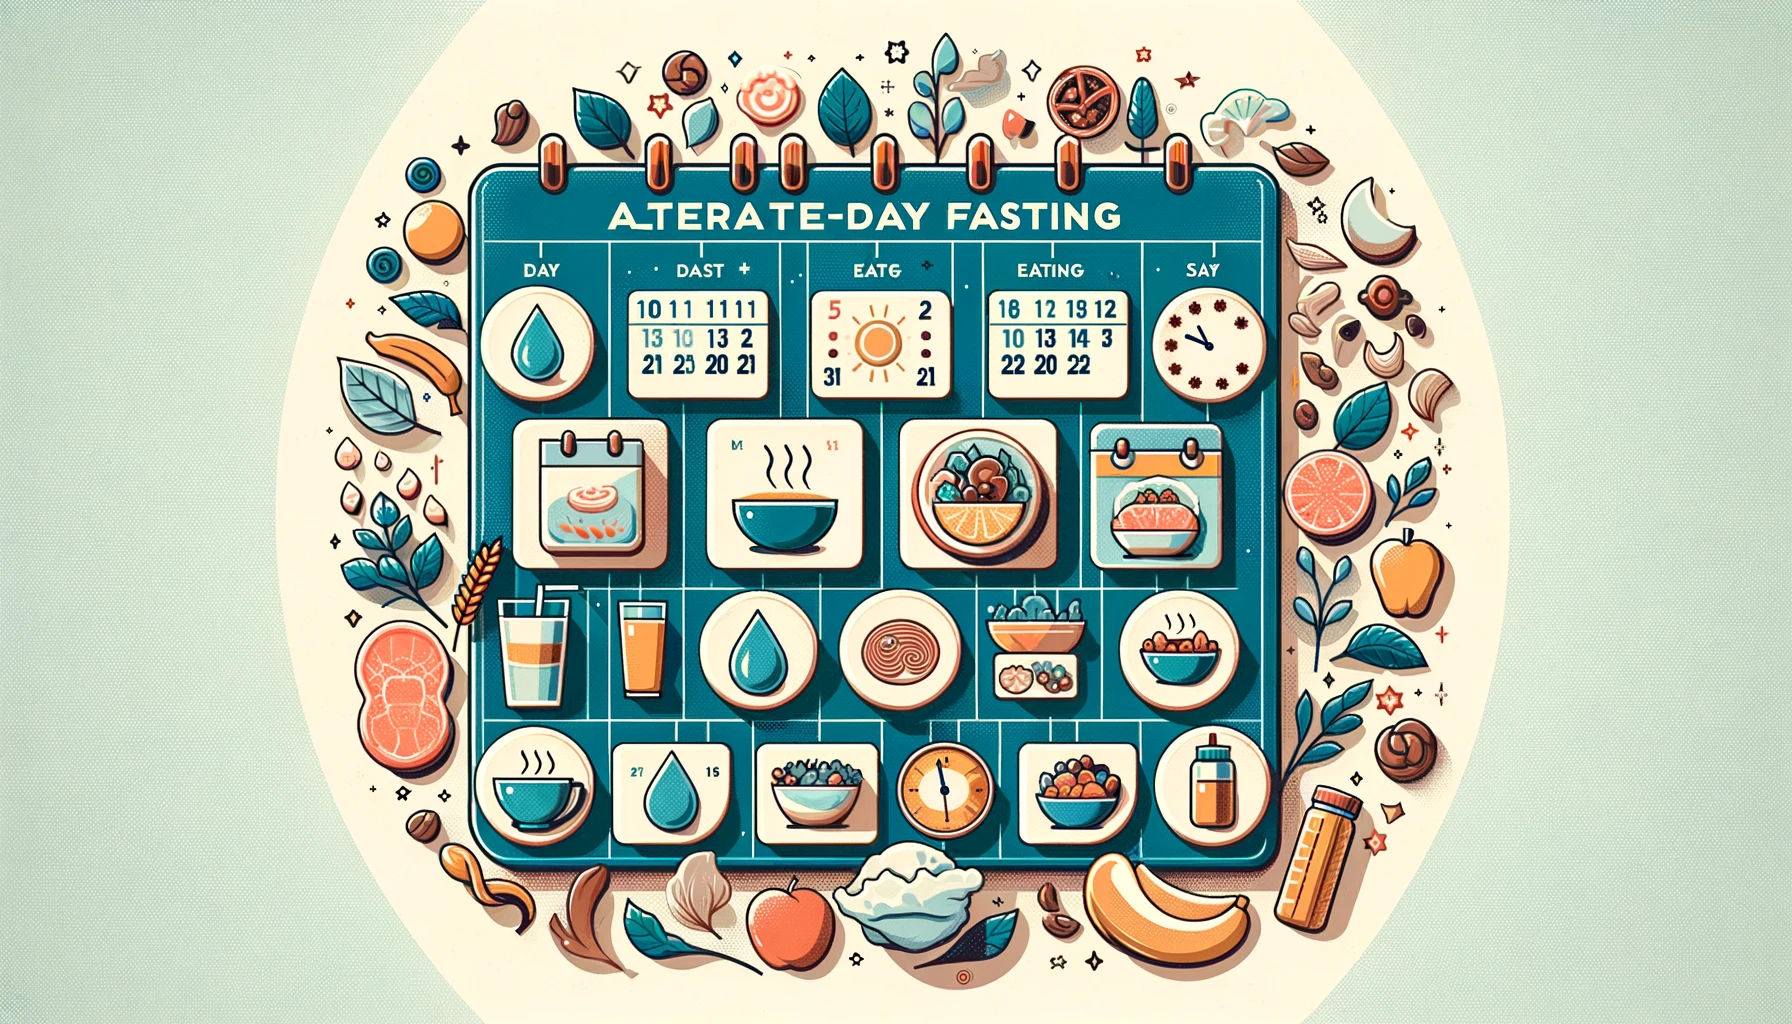 Calendar depicting alternate-day fasting routine with symbols for fasting and eating days, showcasing a healthy fasting approach.